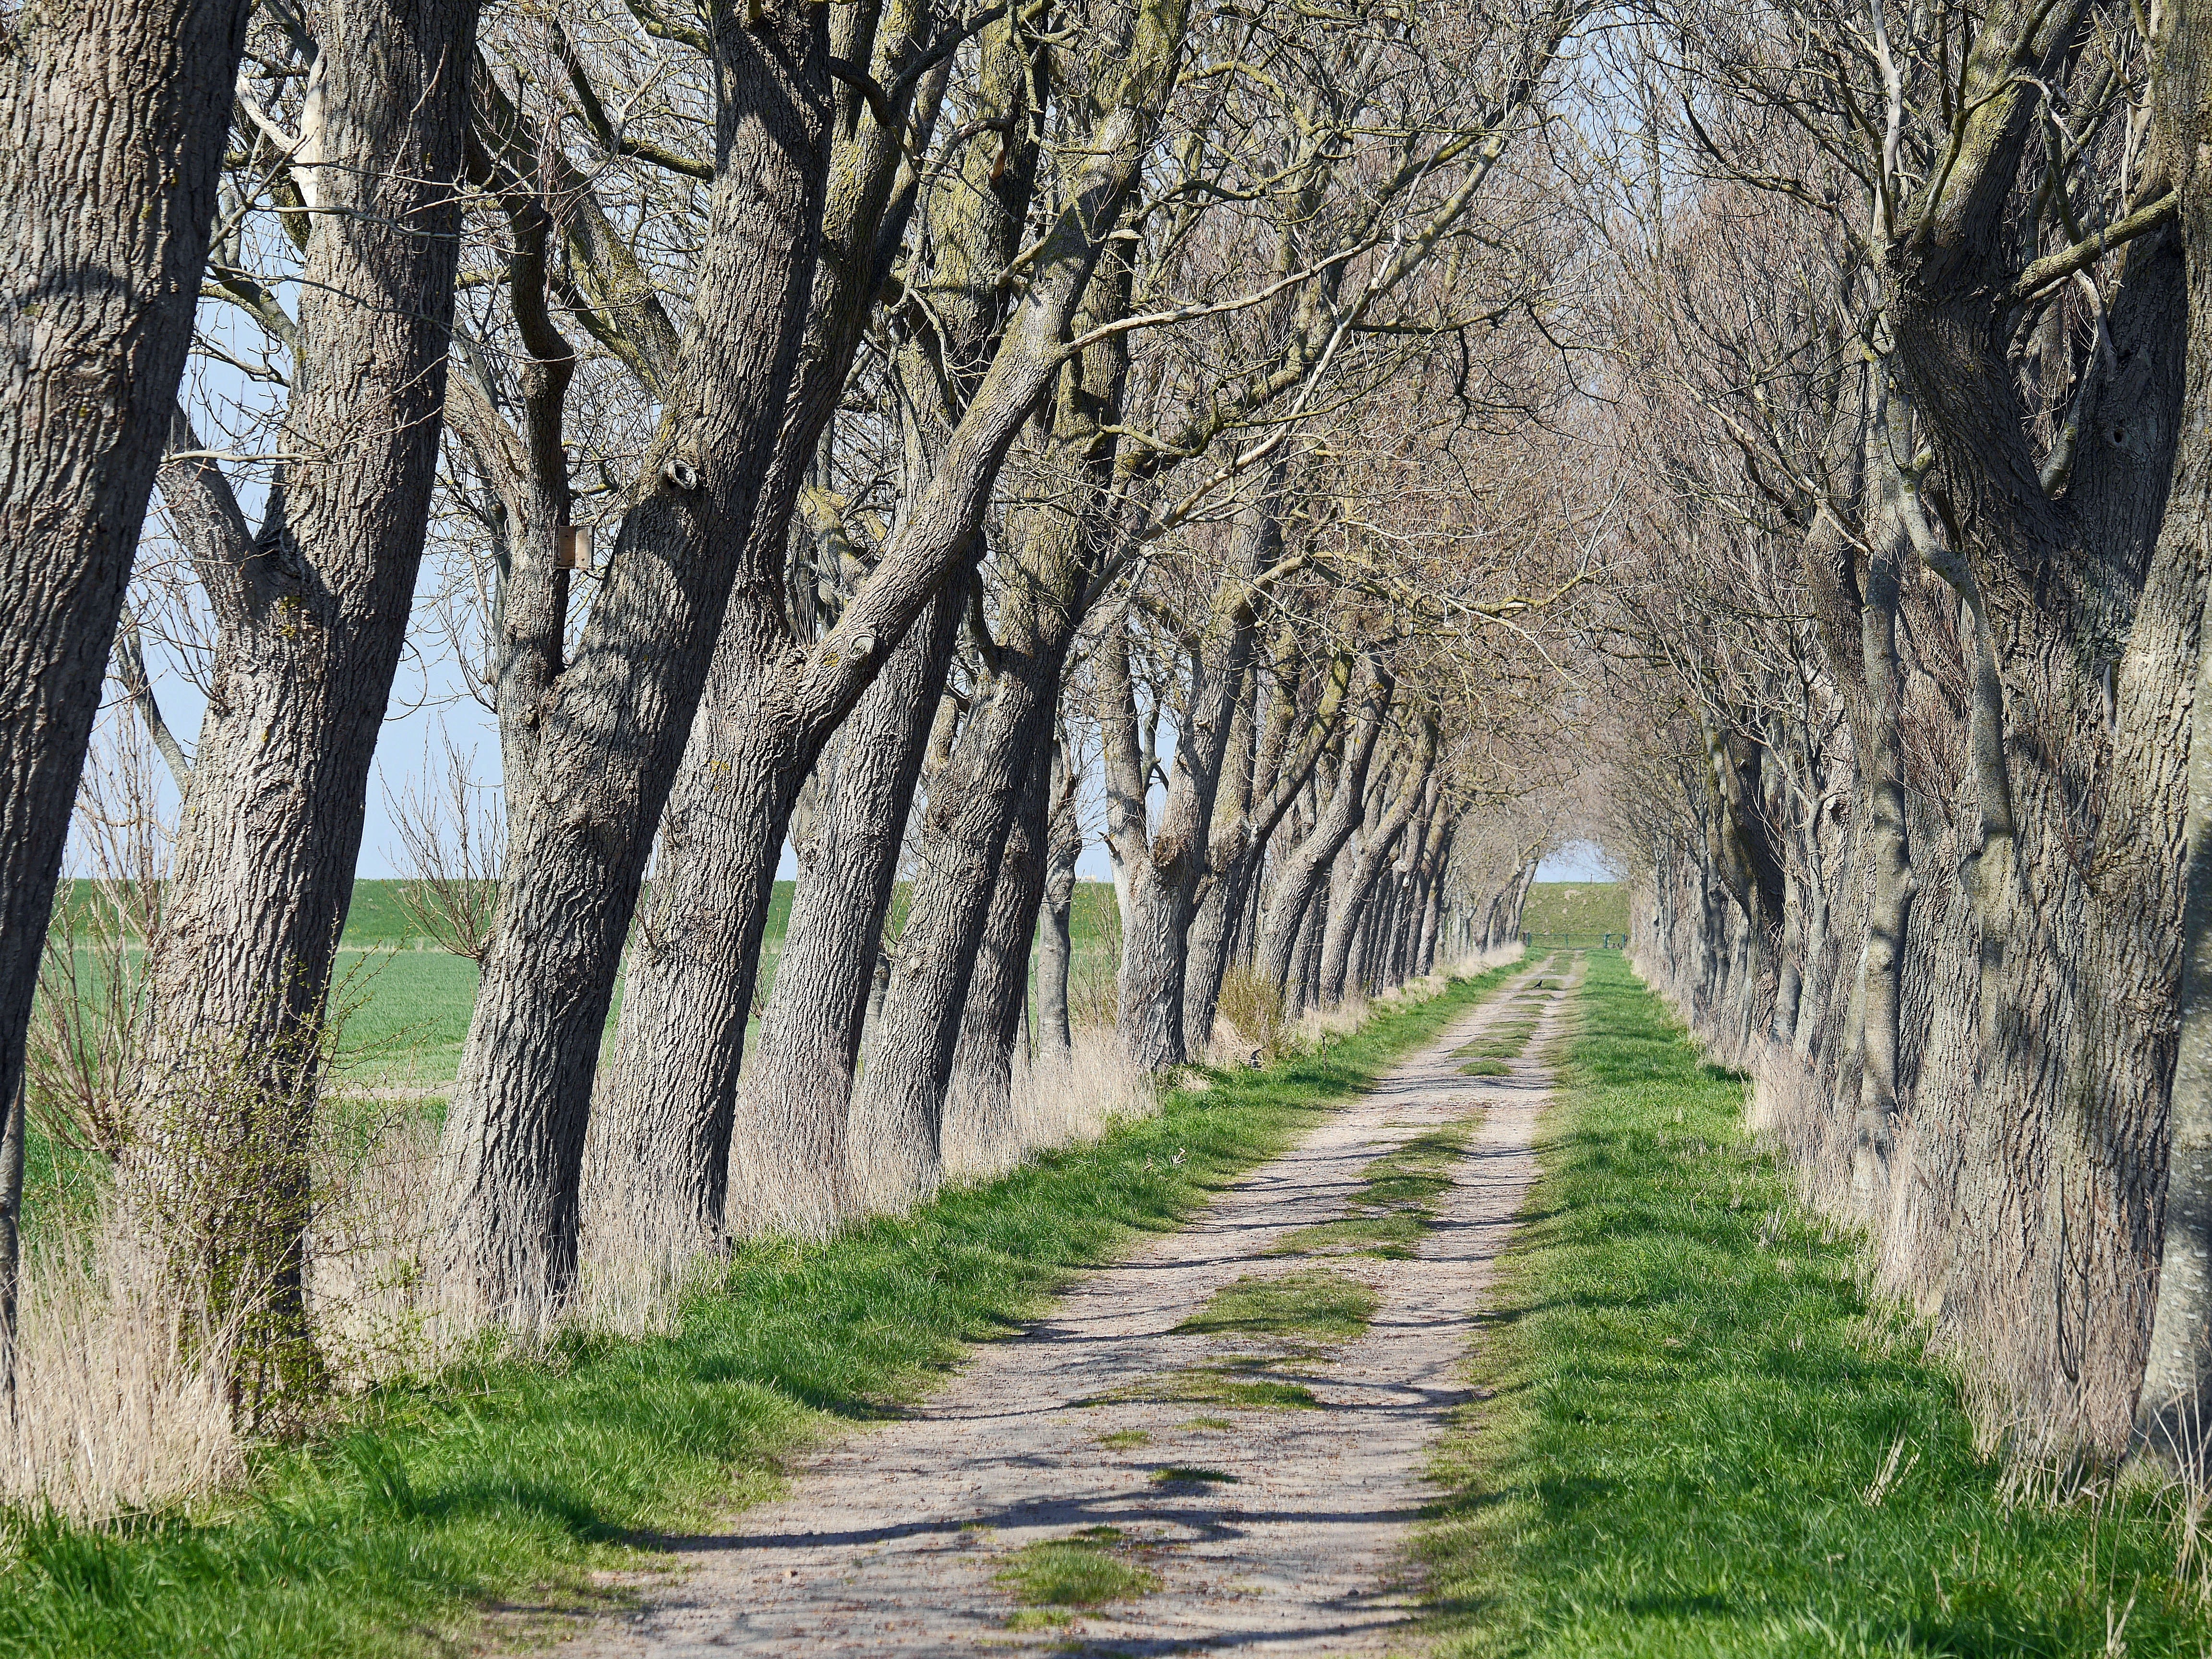 long road surrounded by bare trees